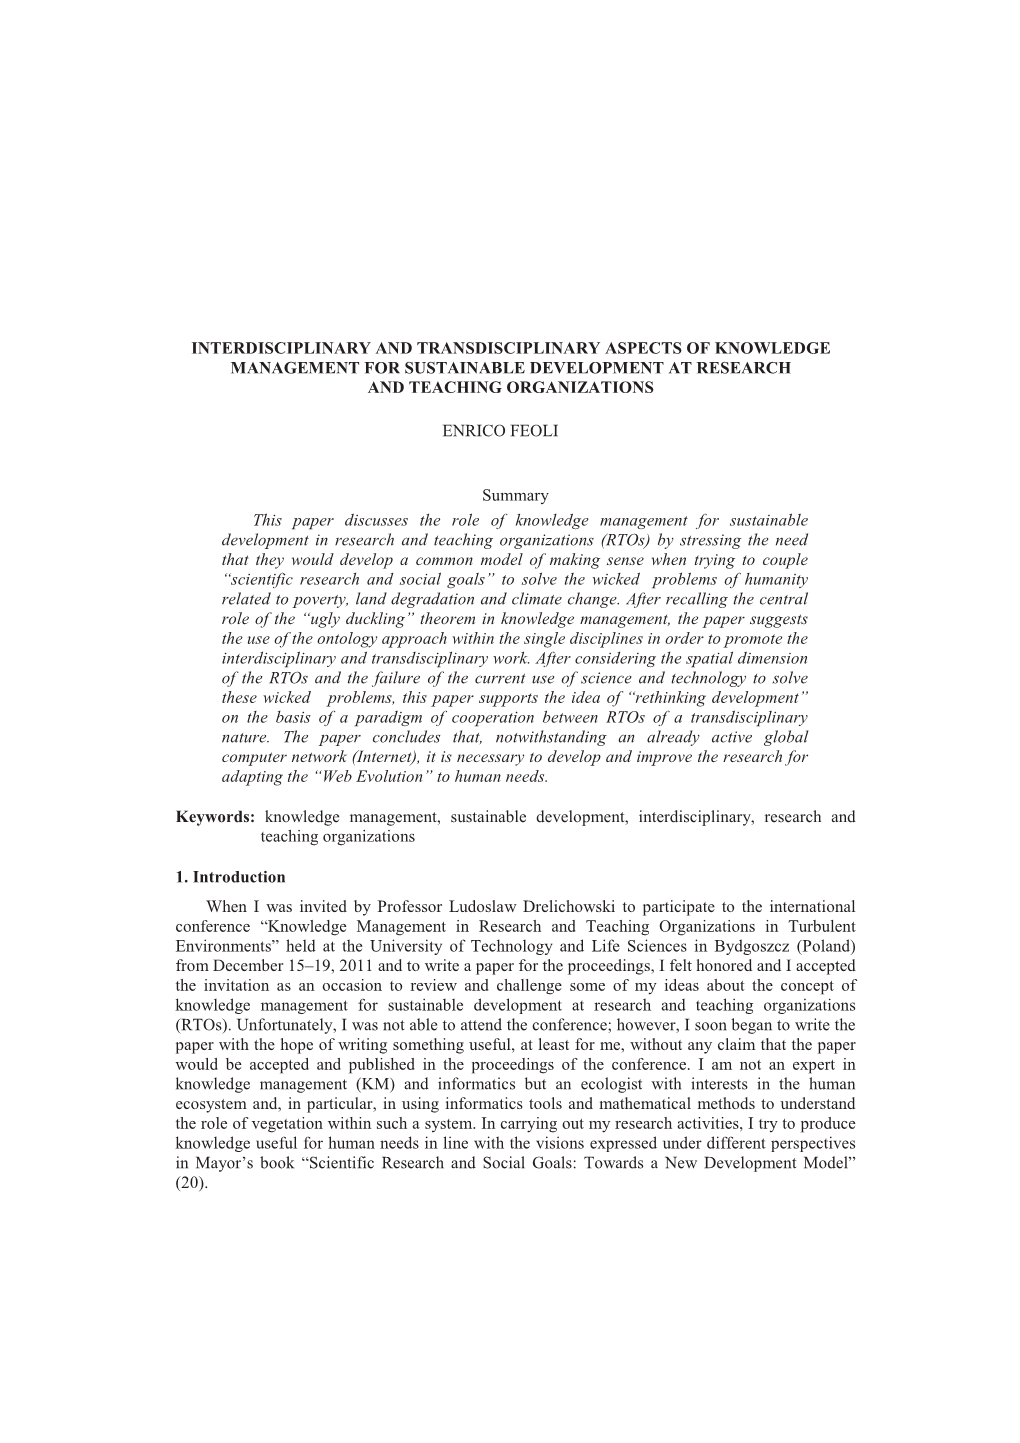 Interdisciplinary and Transdisciplinary Aspects of Knowledge Management for Sustainable Development at Research and Teaching Organizations